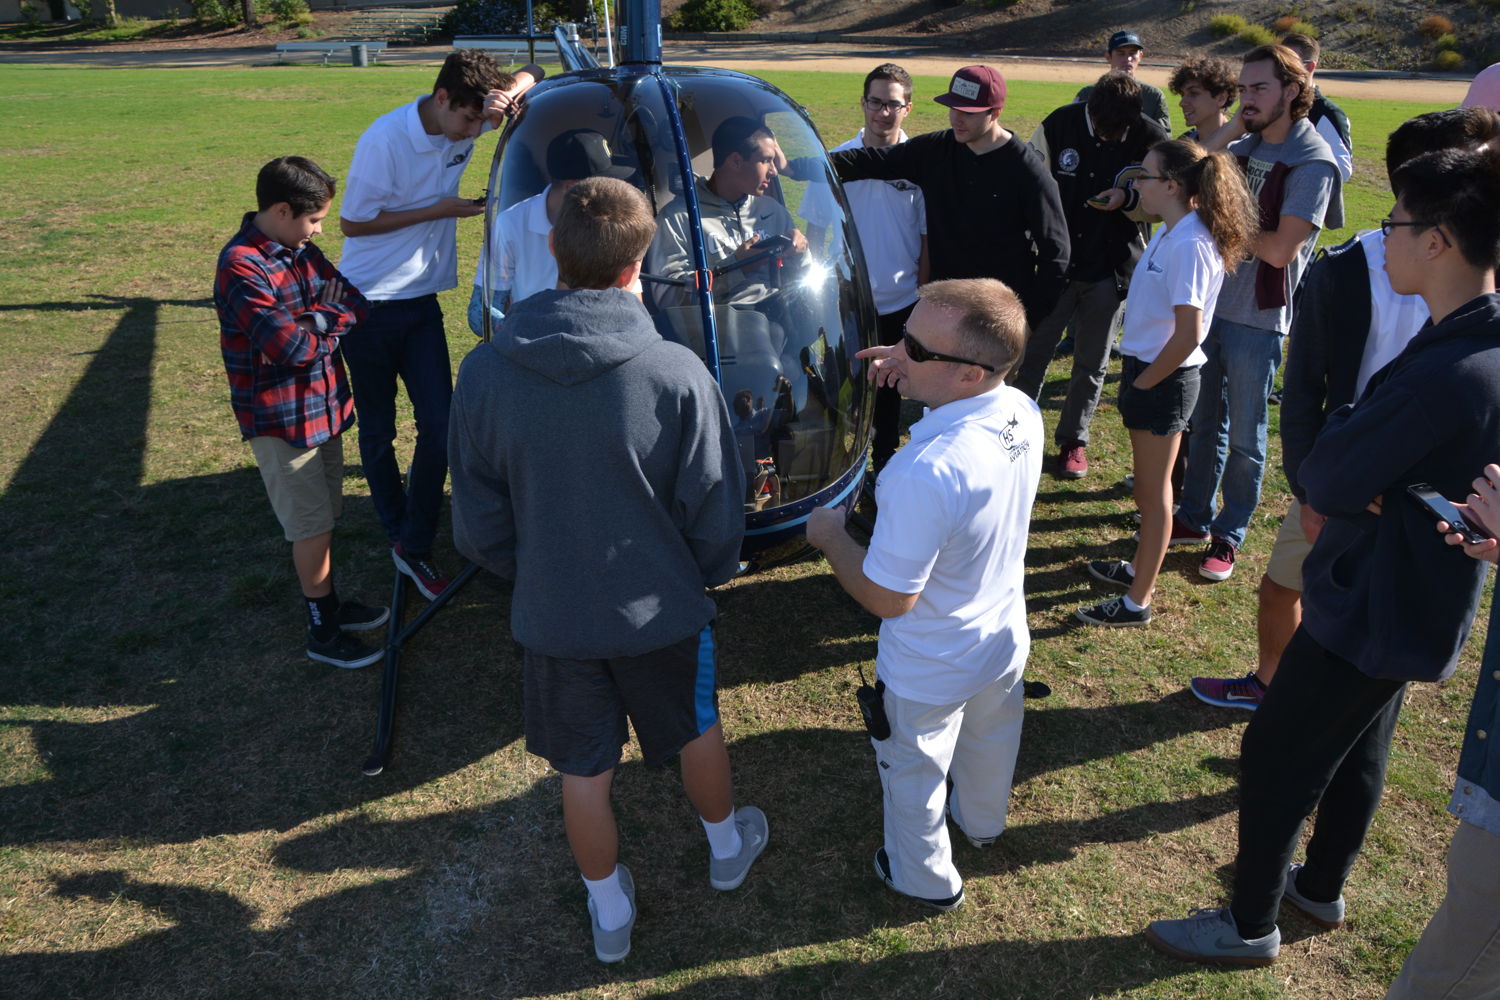 Revolution Aviation landed a helicopter on the Canyon High School field and then explained helicopters to the students while they took turns sitting in the cockpit.